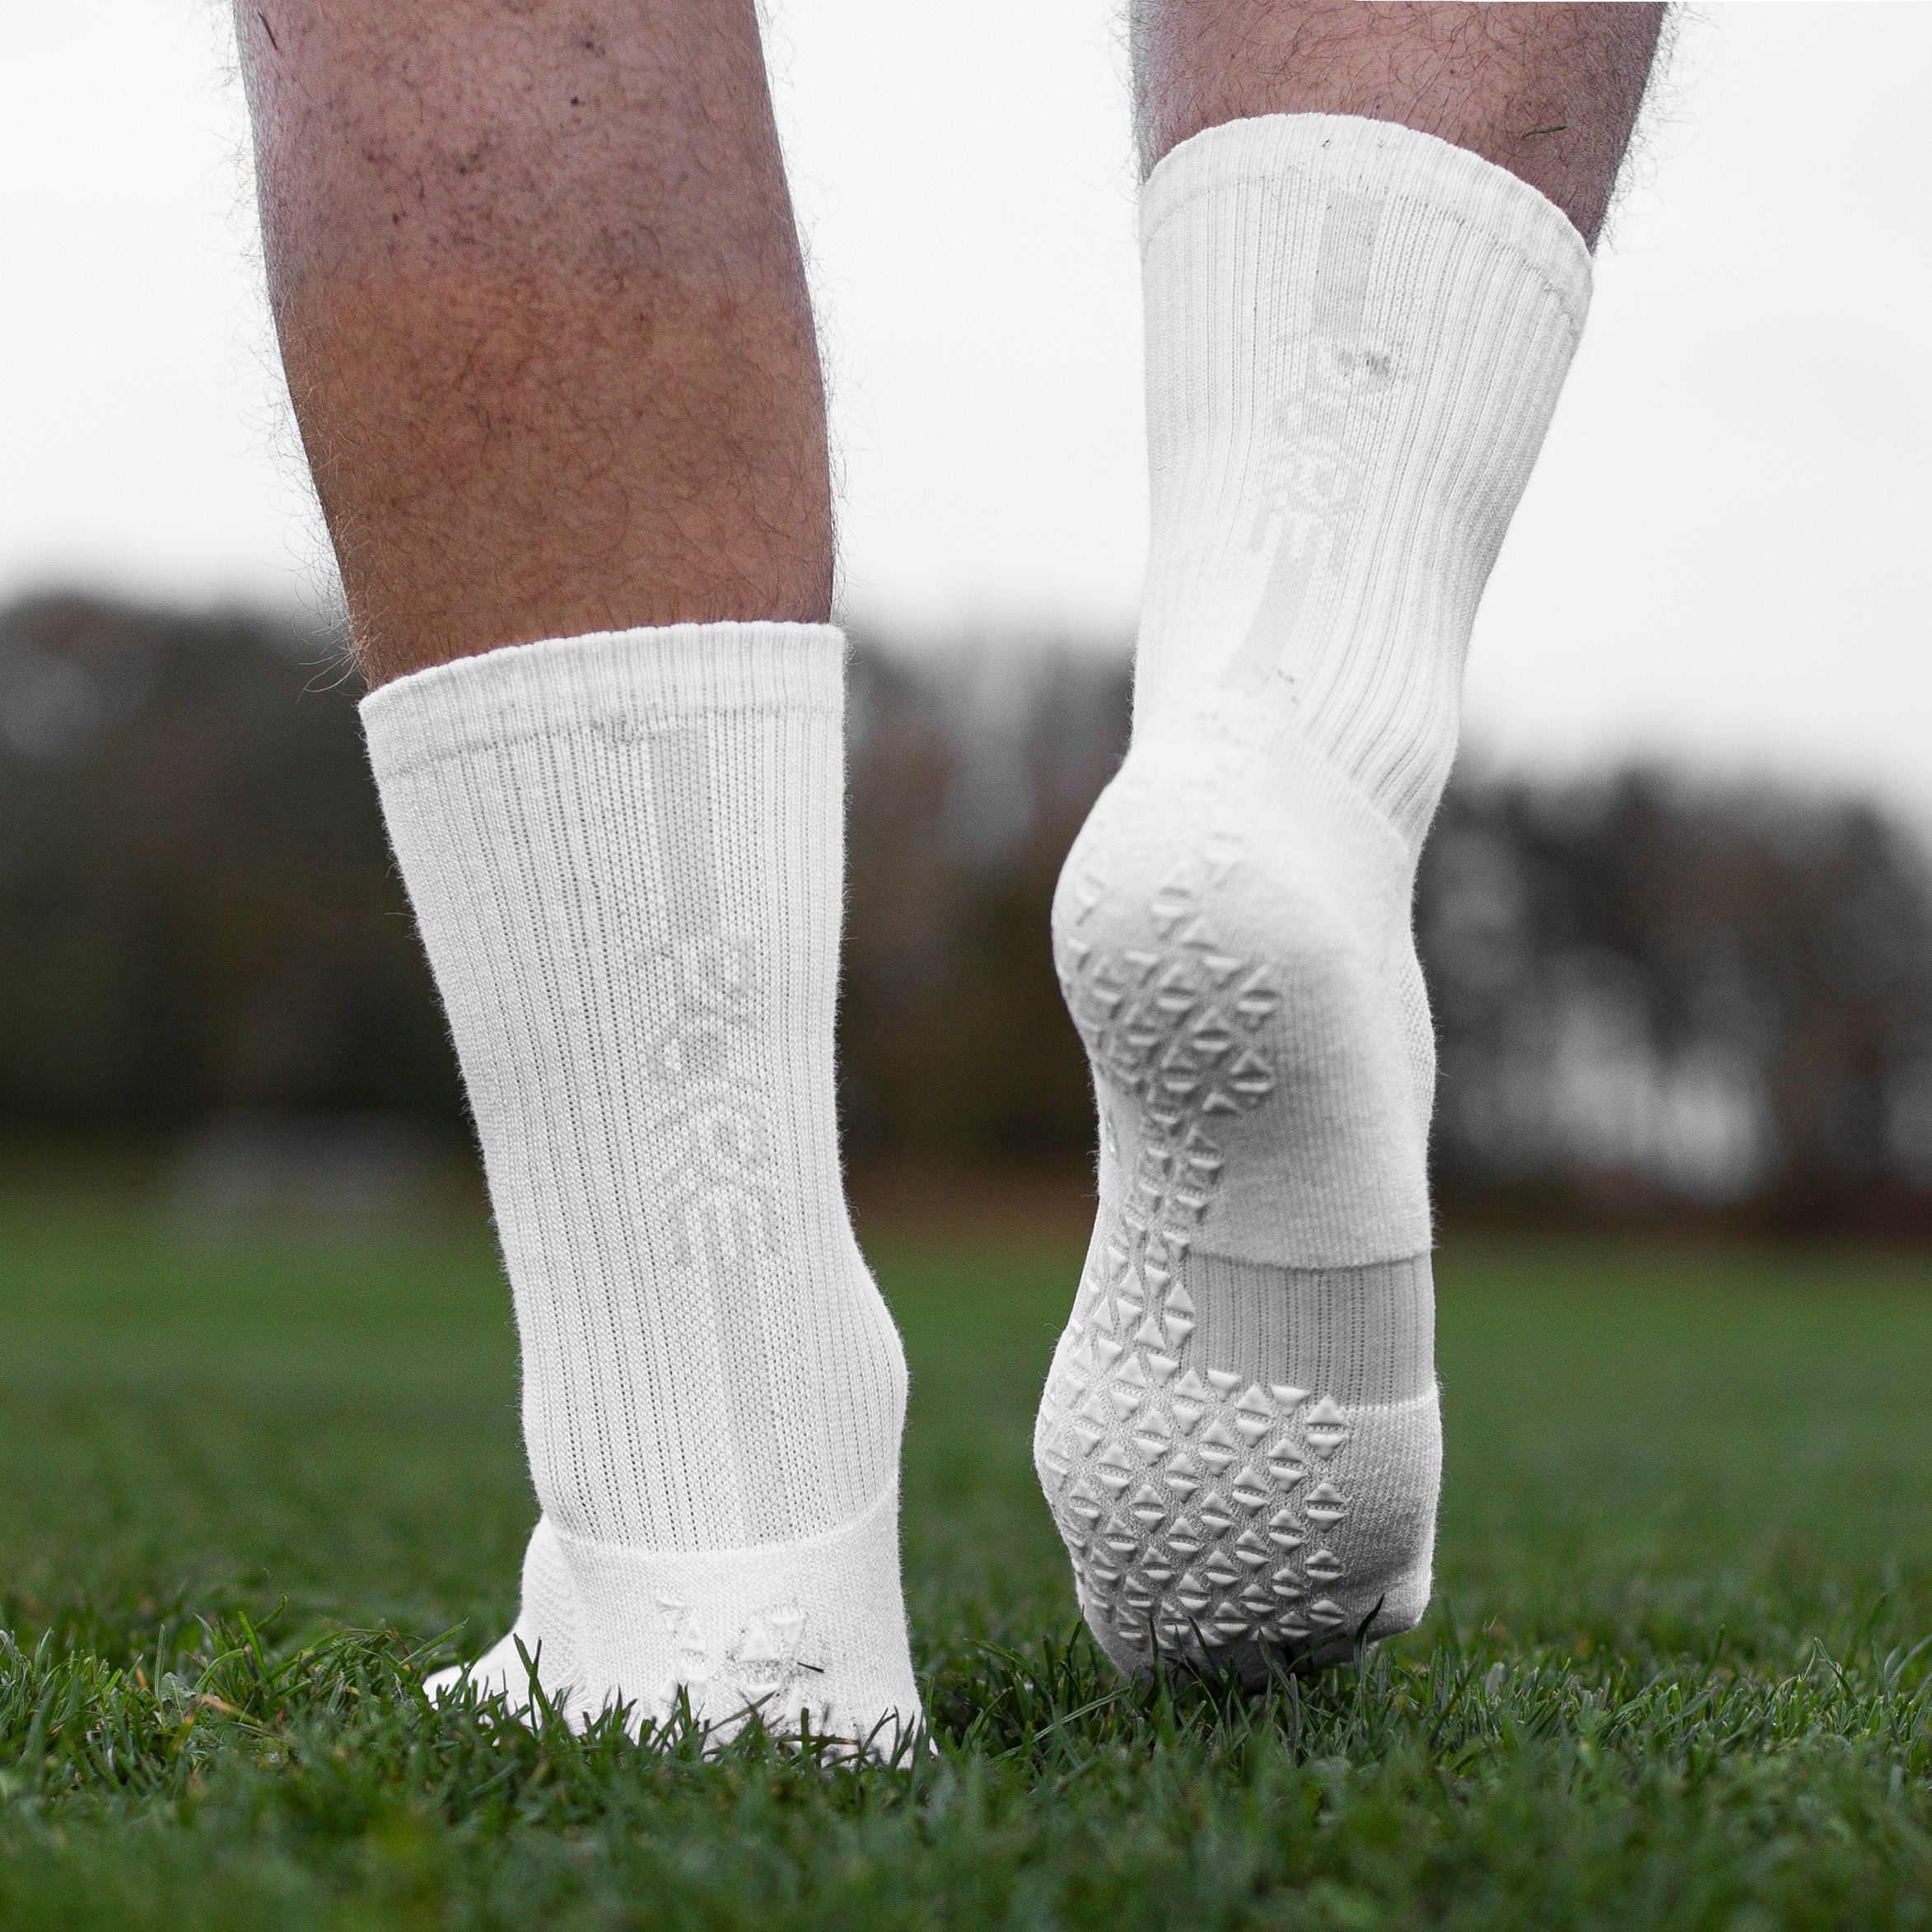 Pure Grip Socks - Latest Emails, Sales & Deals